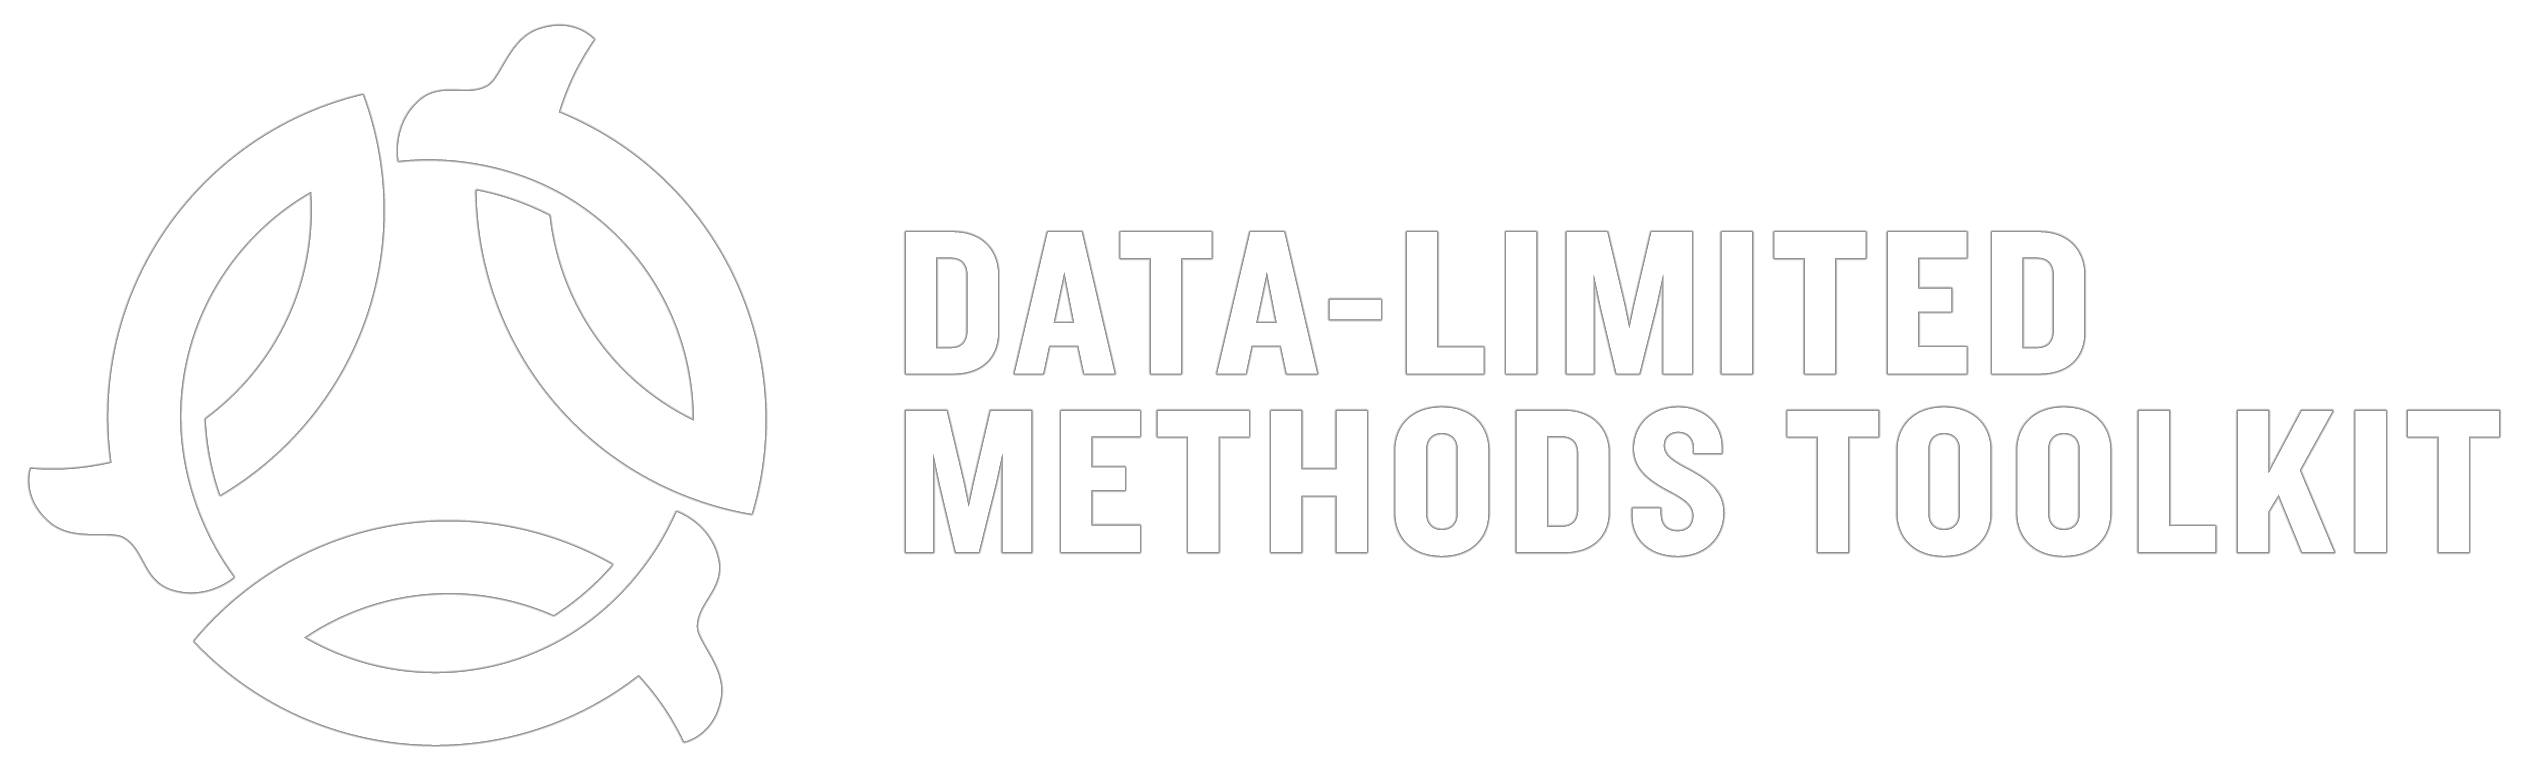 Data-Limited Methods Toolkit (DLMtool) - Management Strategy Evaluation for Data-Limited Fisheries